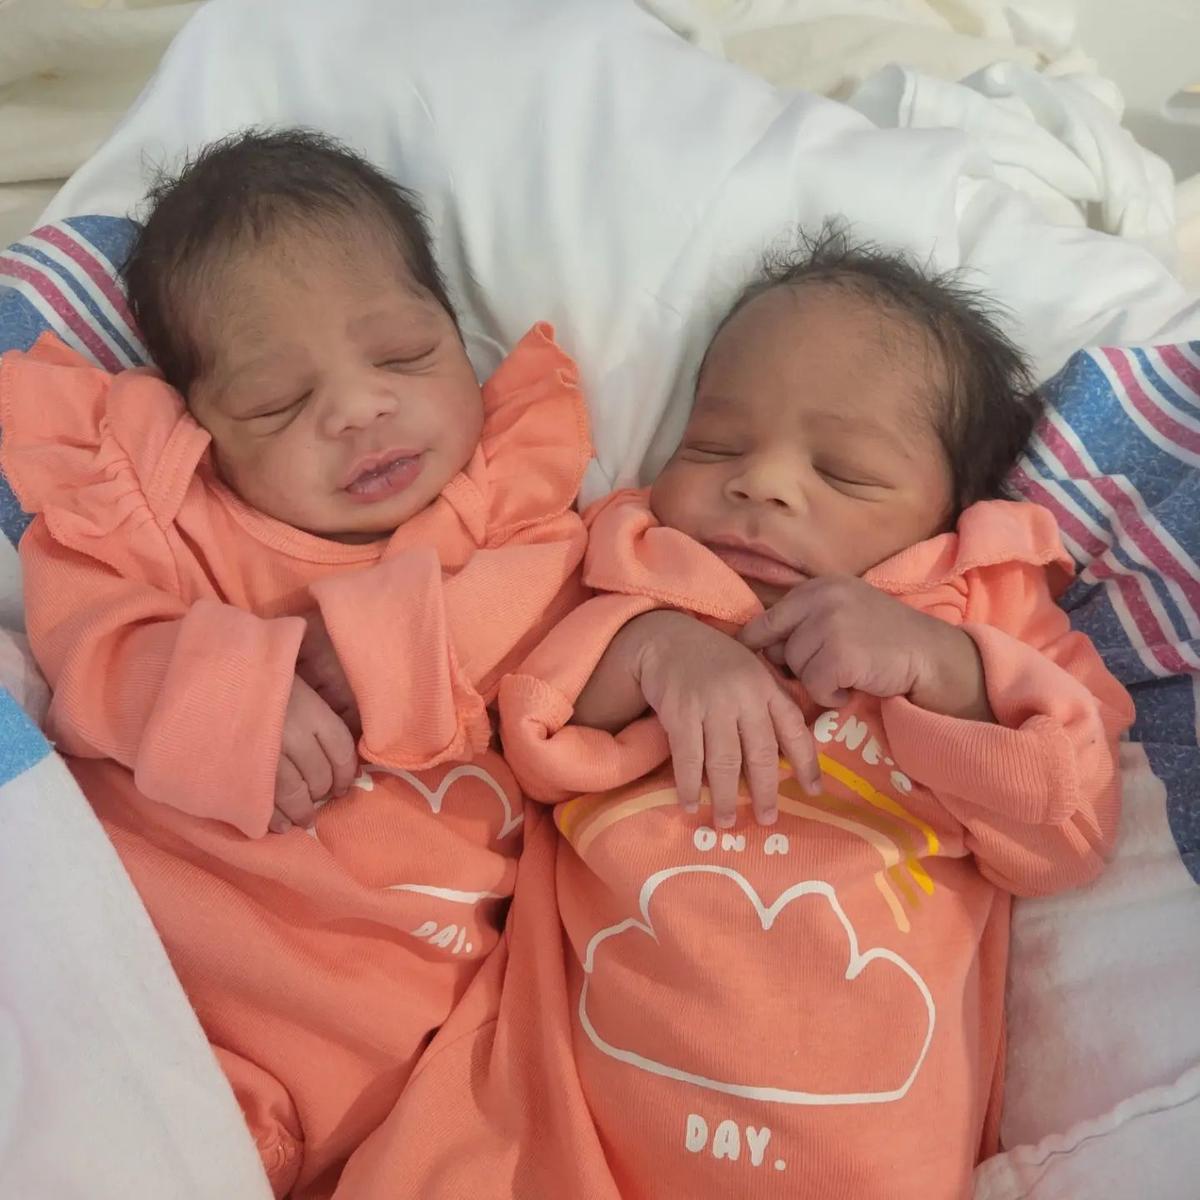 The third set of twins, Kenzy and Kenzley. (Courtesy of <a href="https://www.instagram.com/10andkim/">Kimberly Alarcon</a>)